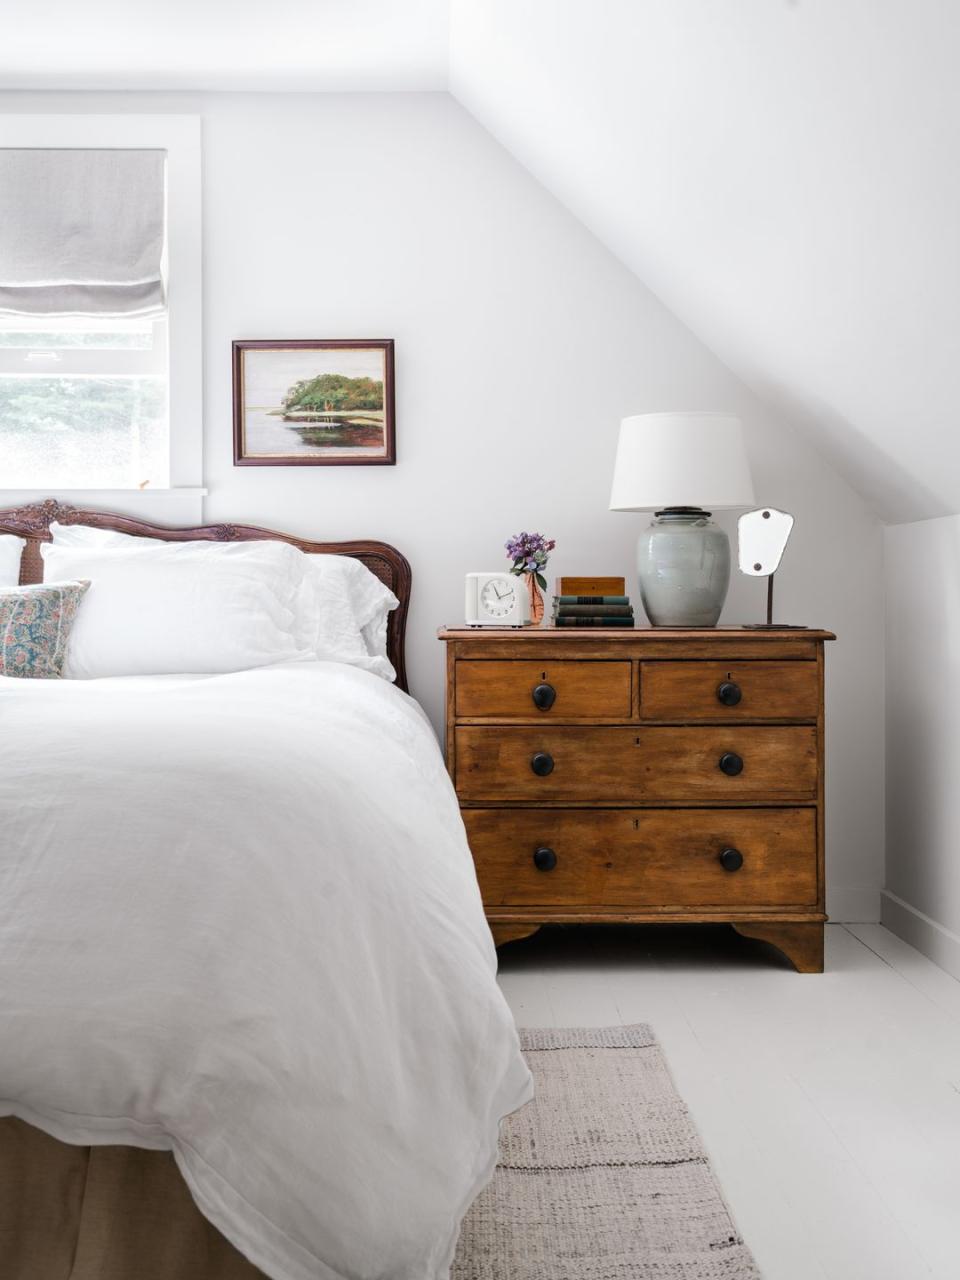 Create a Dreamy Space with These Bedroom Paint Color Ideas